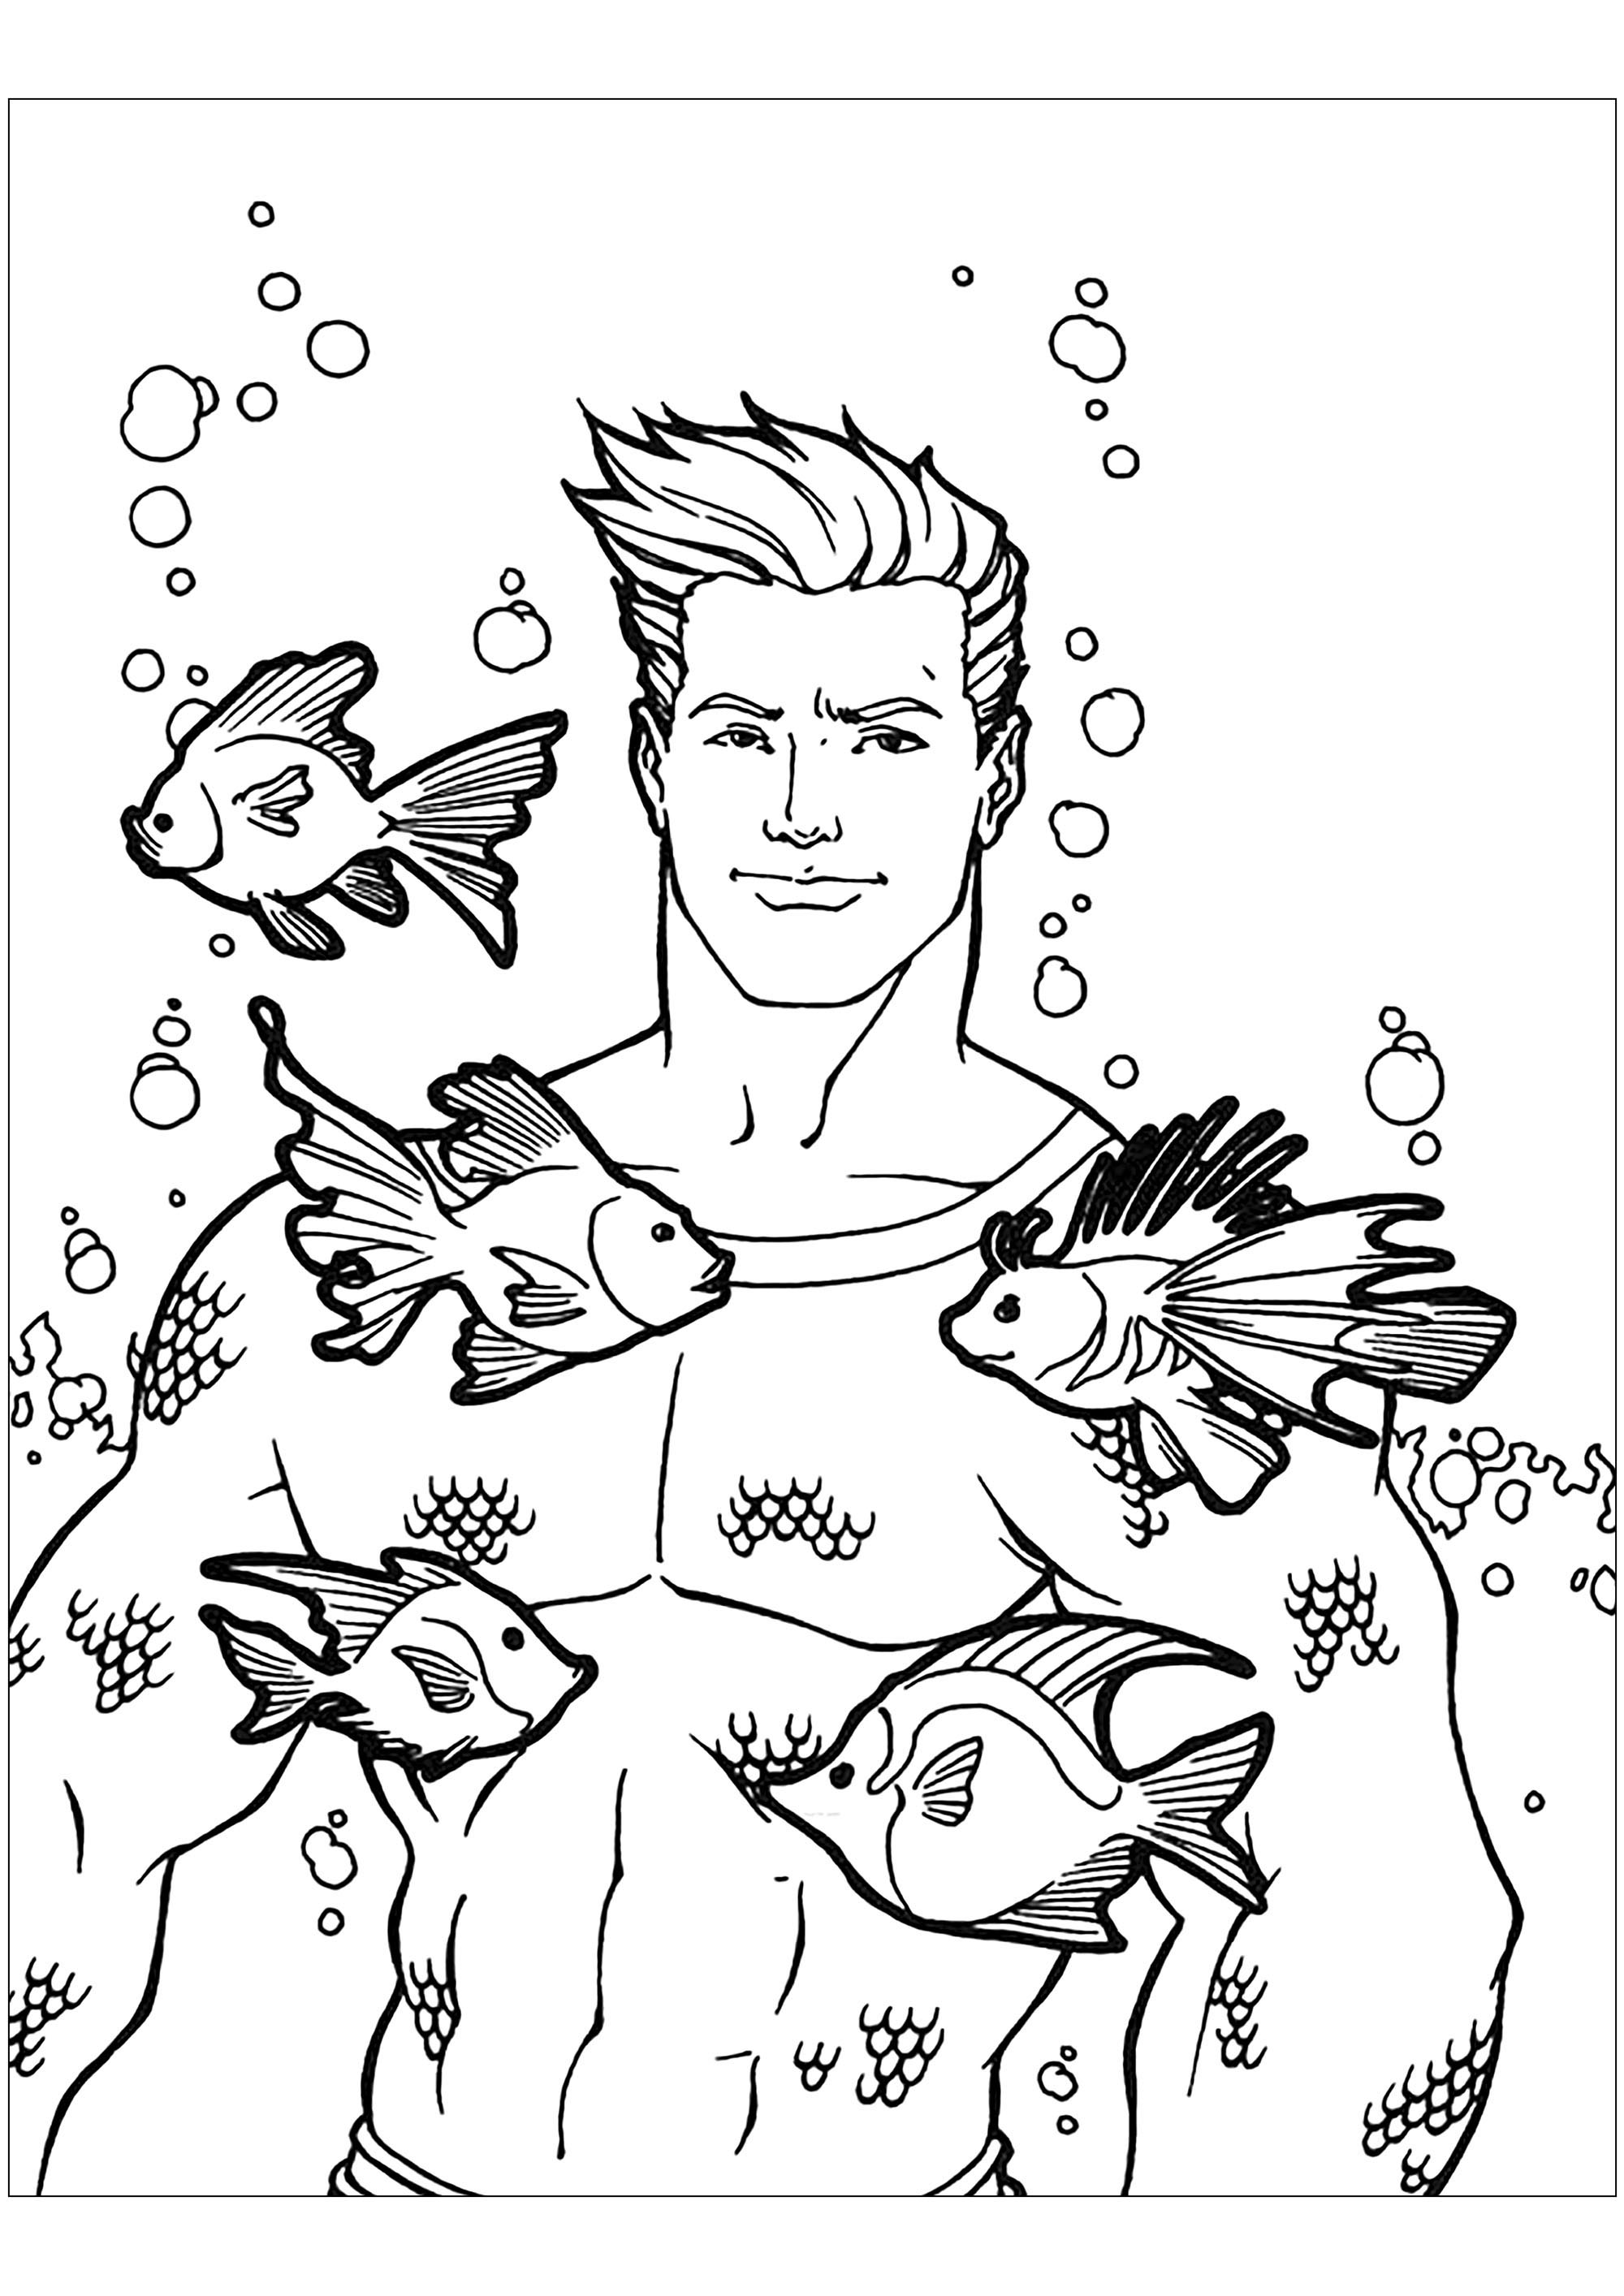 Aquaman With Fishes